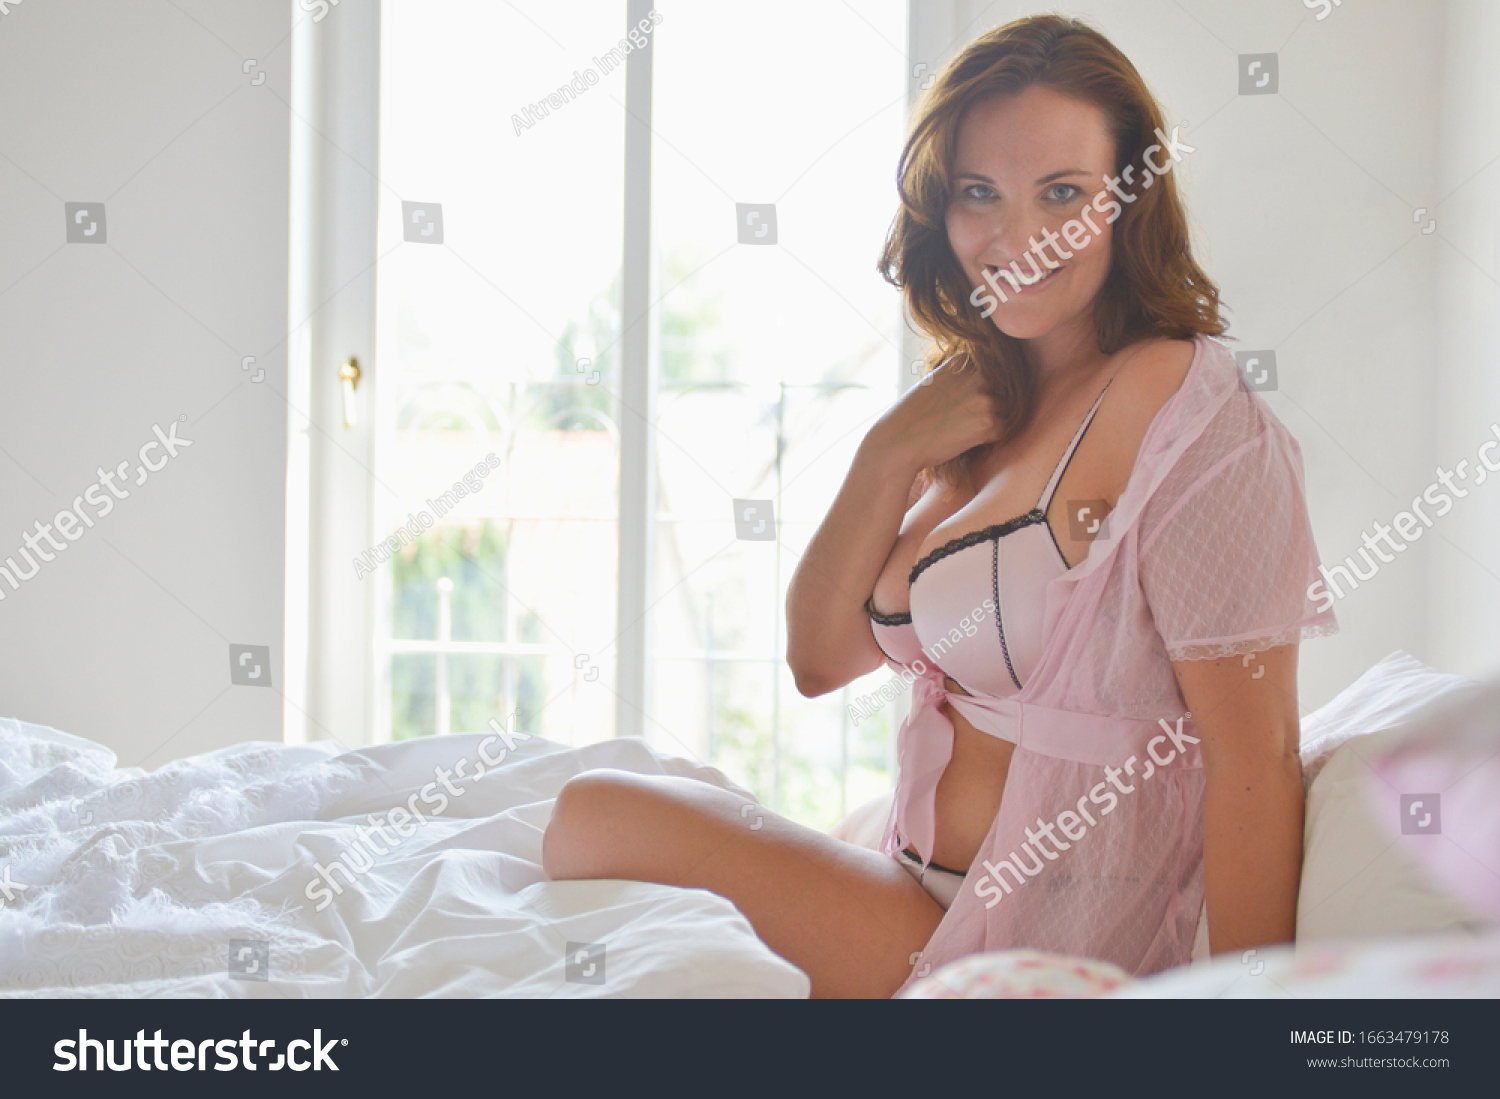 stock-photo-mid-adult-woman-in-lingerie-sitting-on-bed-portrait-1663479178.jpg